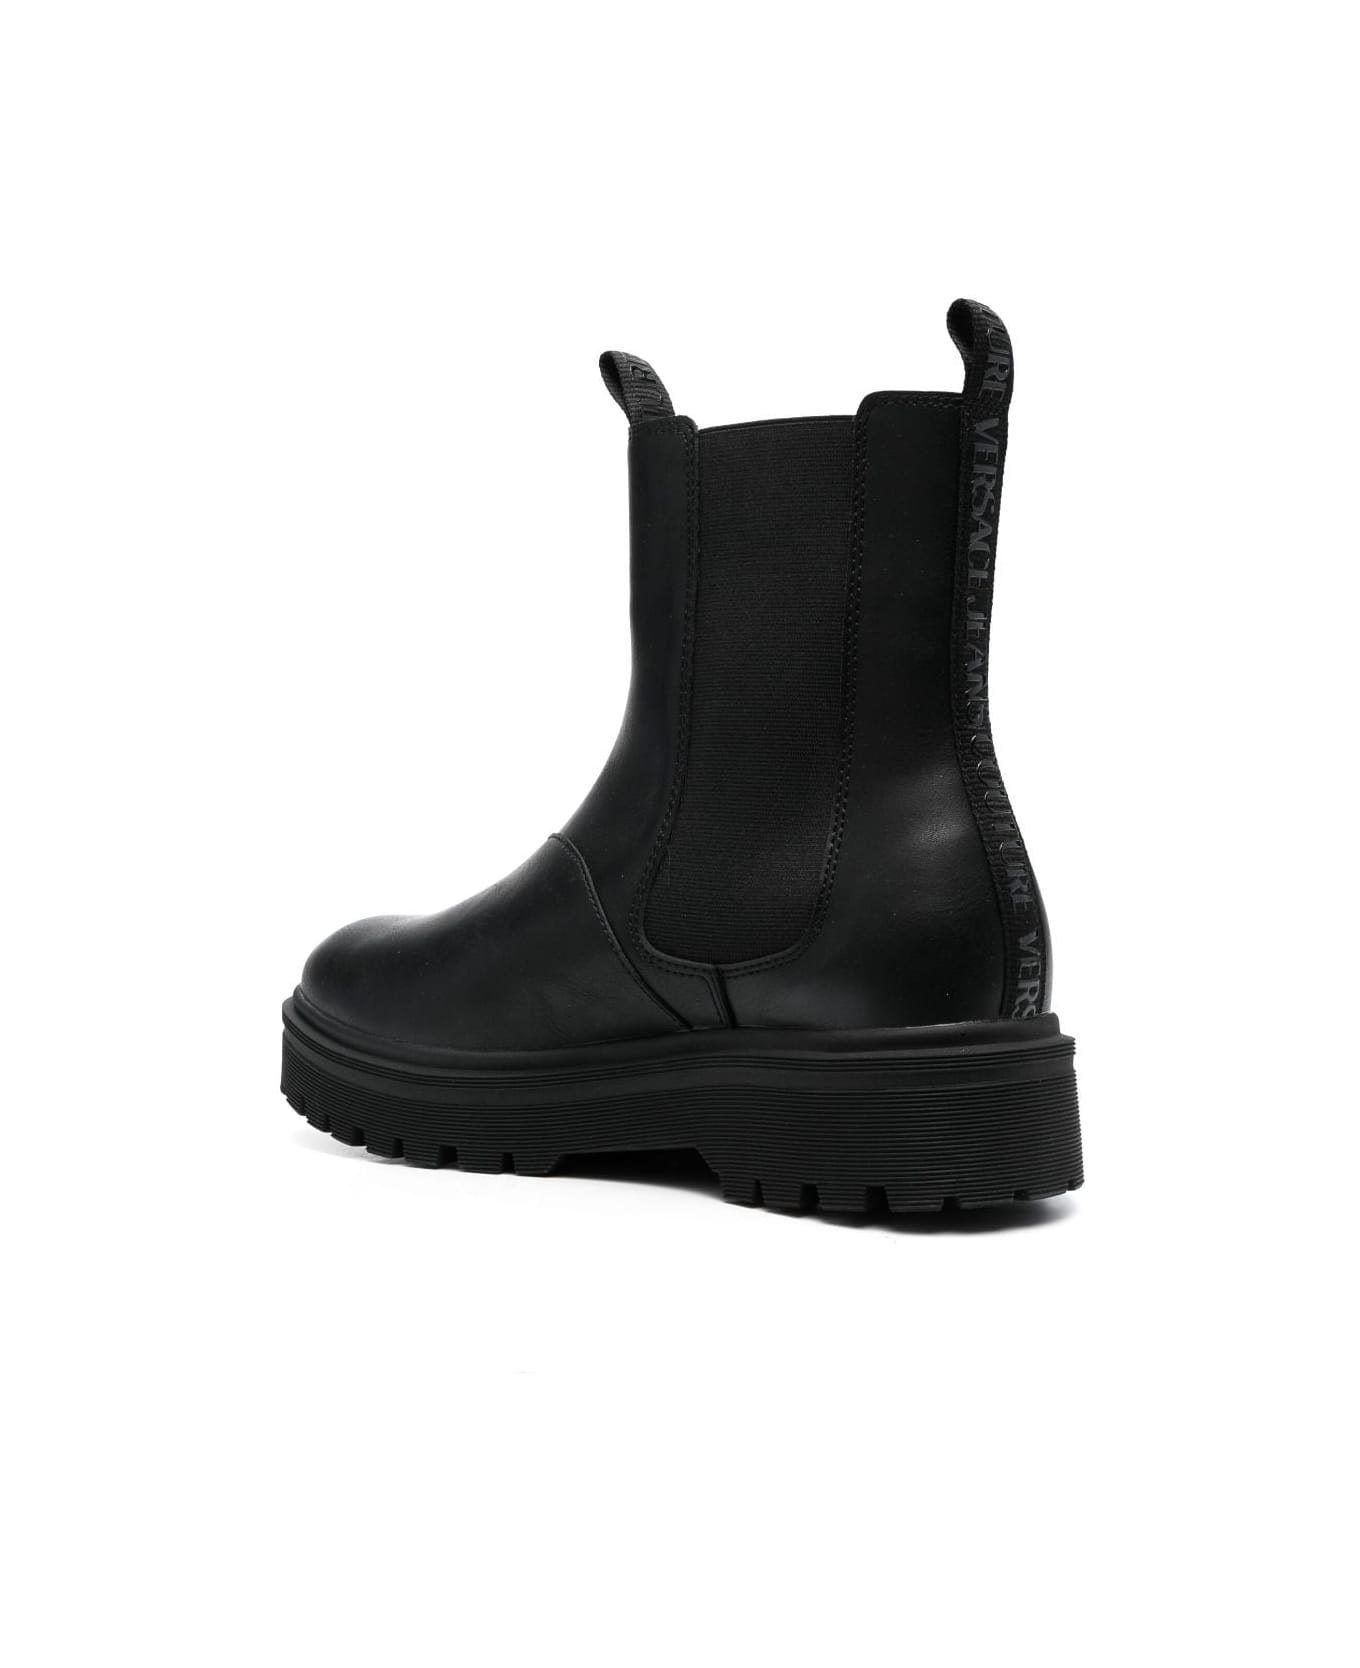 Versace Jeans Couture Syrius Dis47 Boots - Black ブーツ